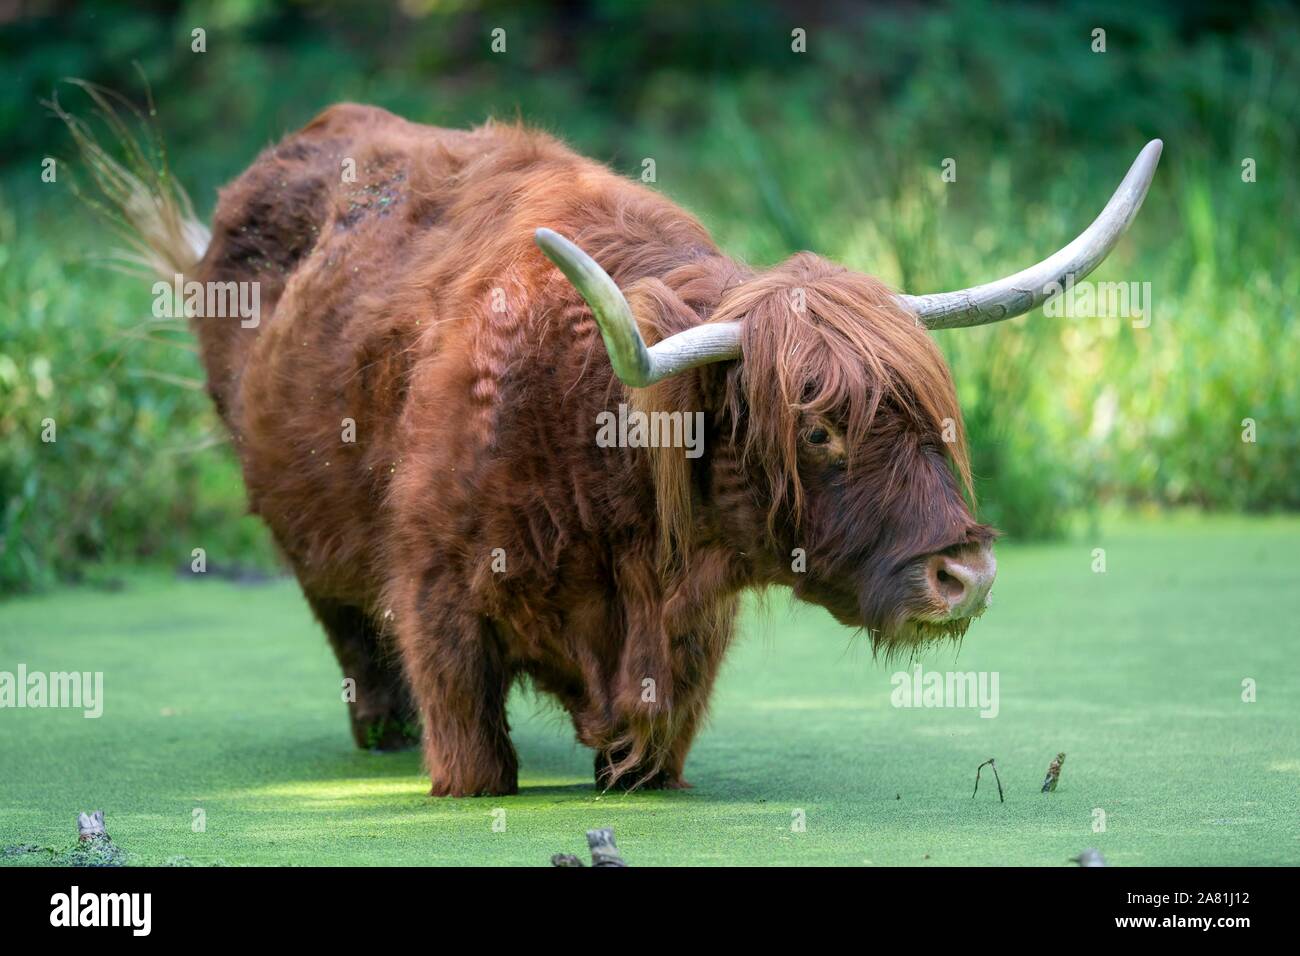 Highland cattle (Bos taurus) in water with duckweeds, Germany Stock Photo